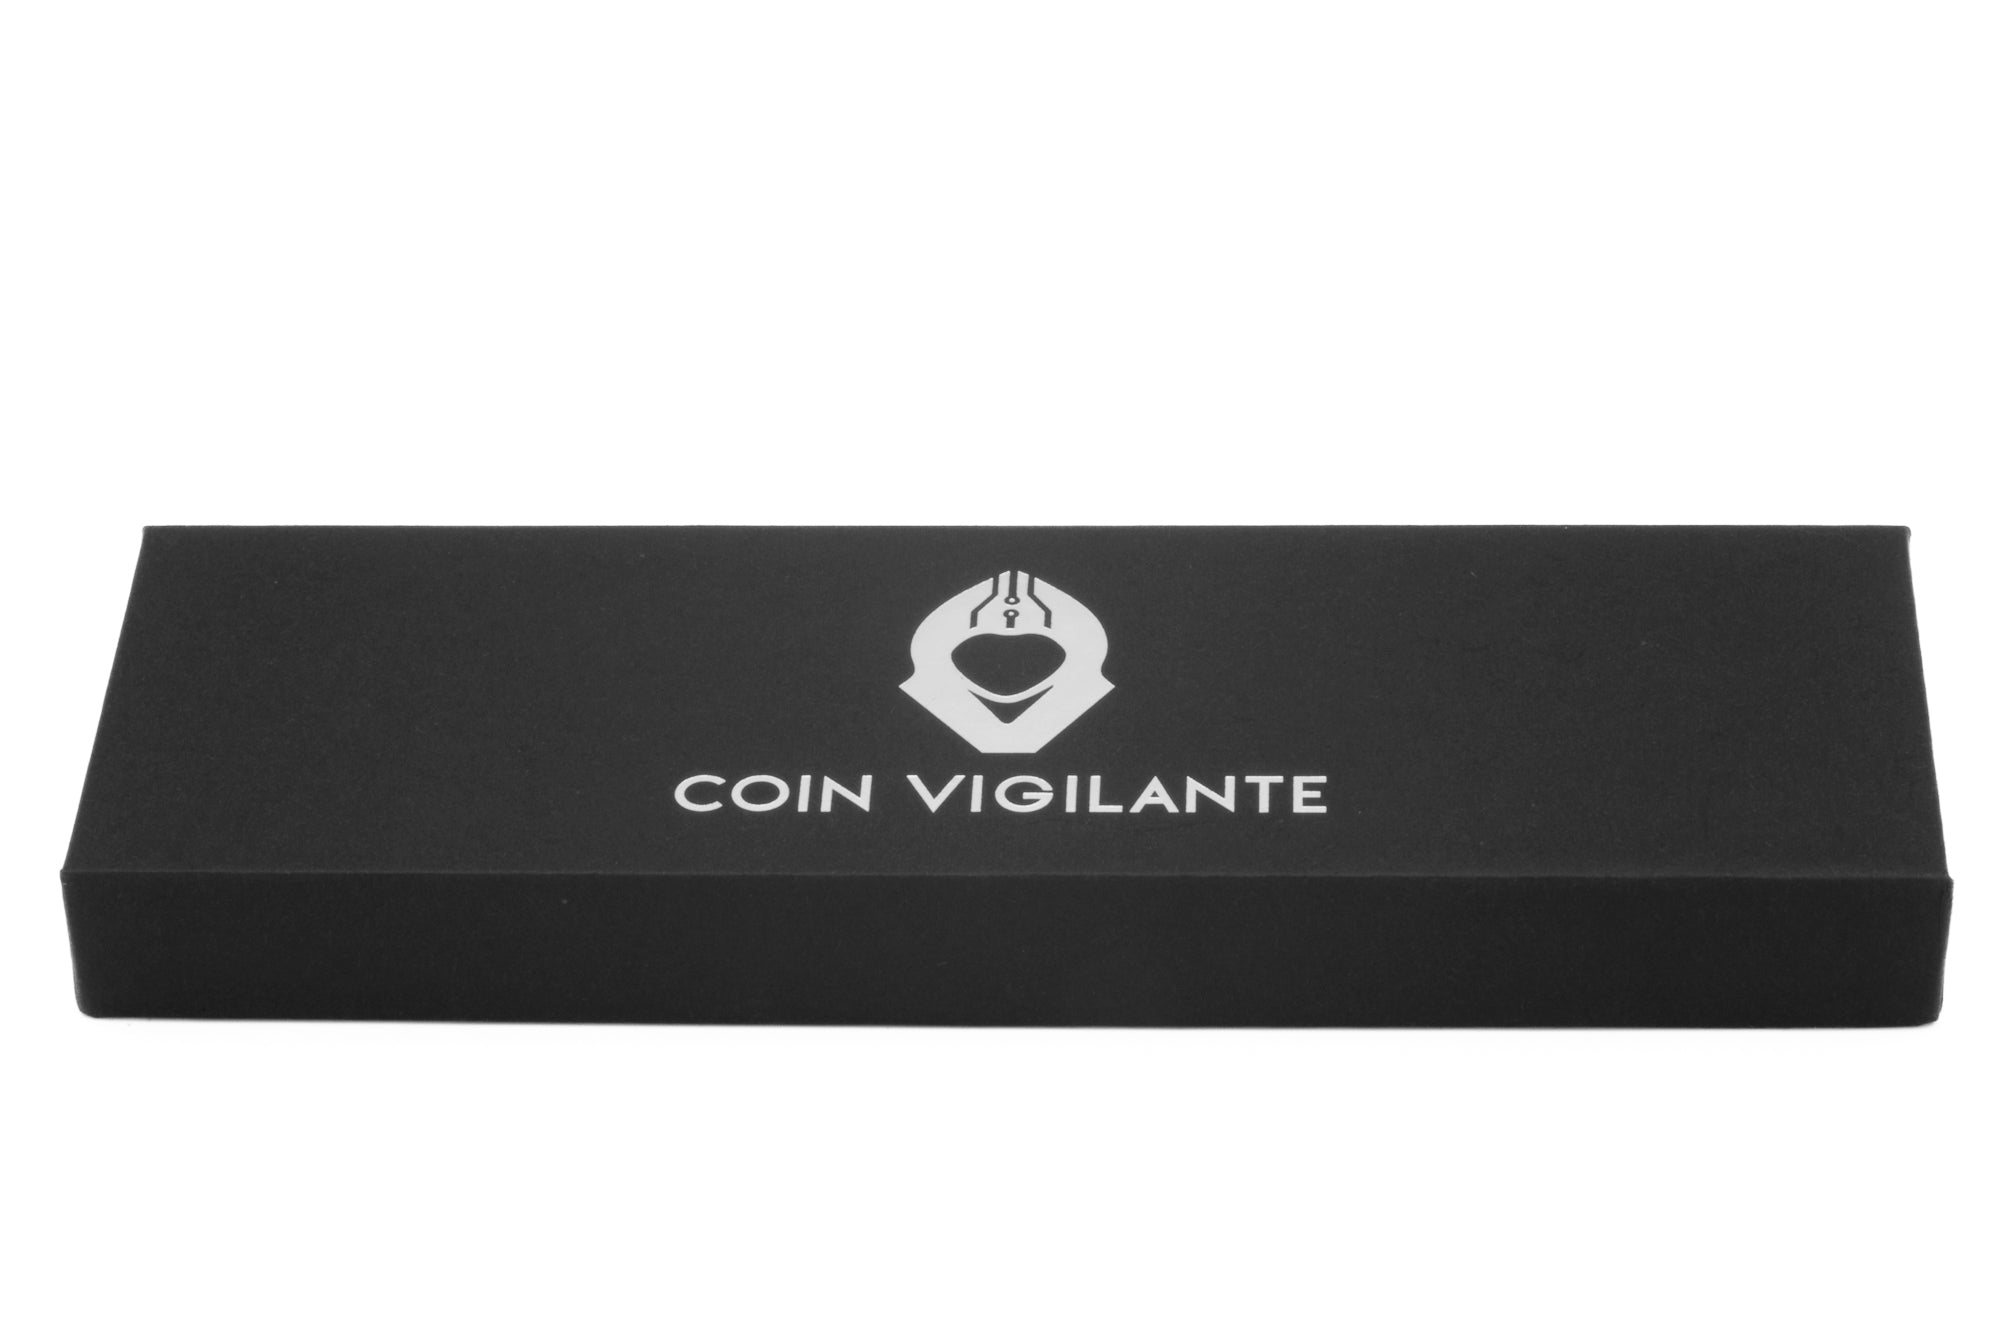 Adjustment tool included with Coin Vigilante Stainless Steel Band